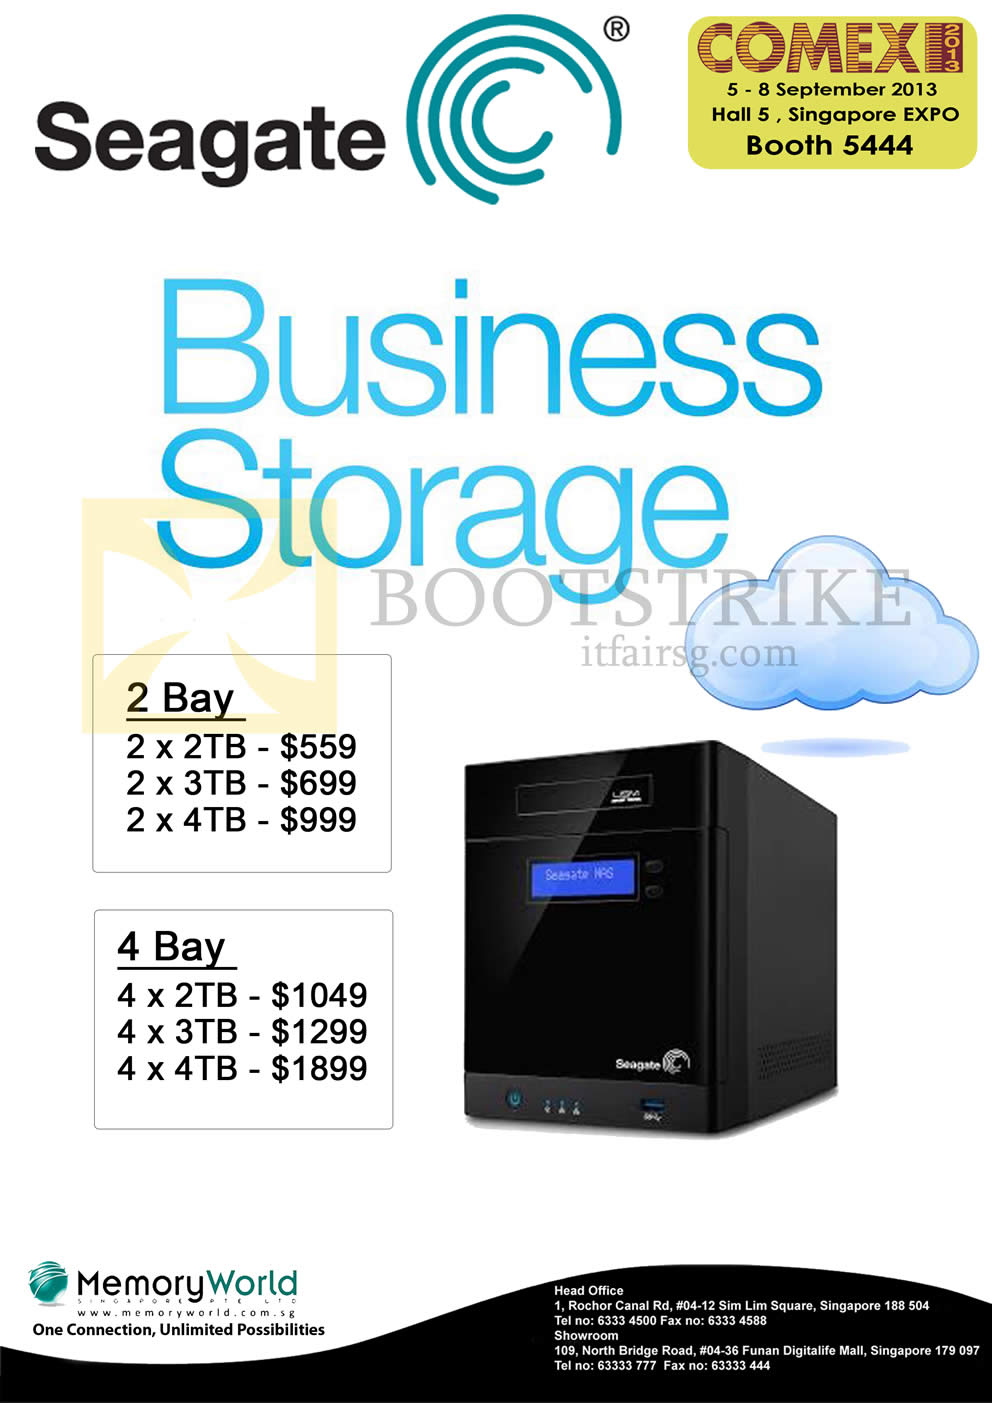 COMEX 2013 price list image brochure of Memory World Seagate NAS Business Storage 2 Bay, 4 Bay